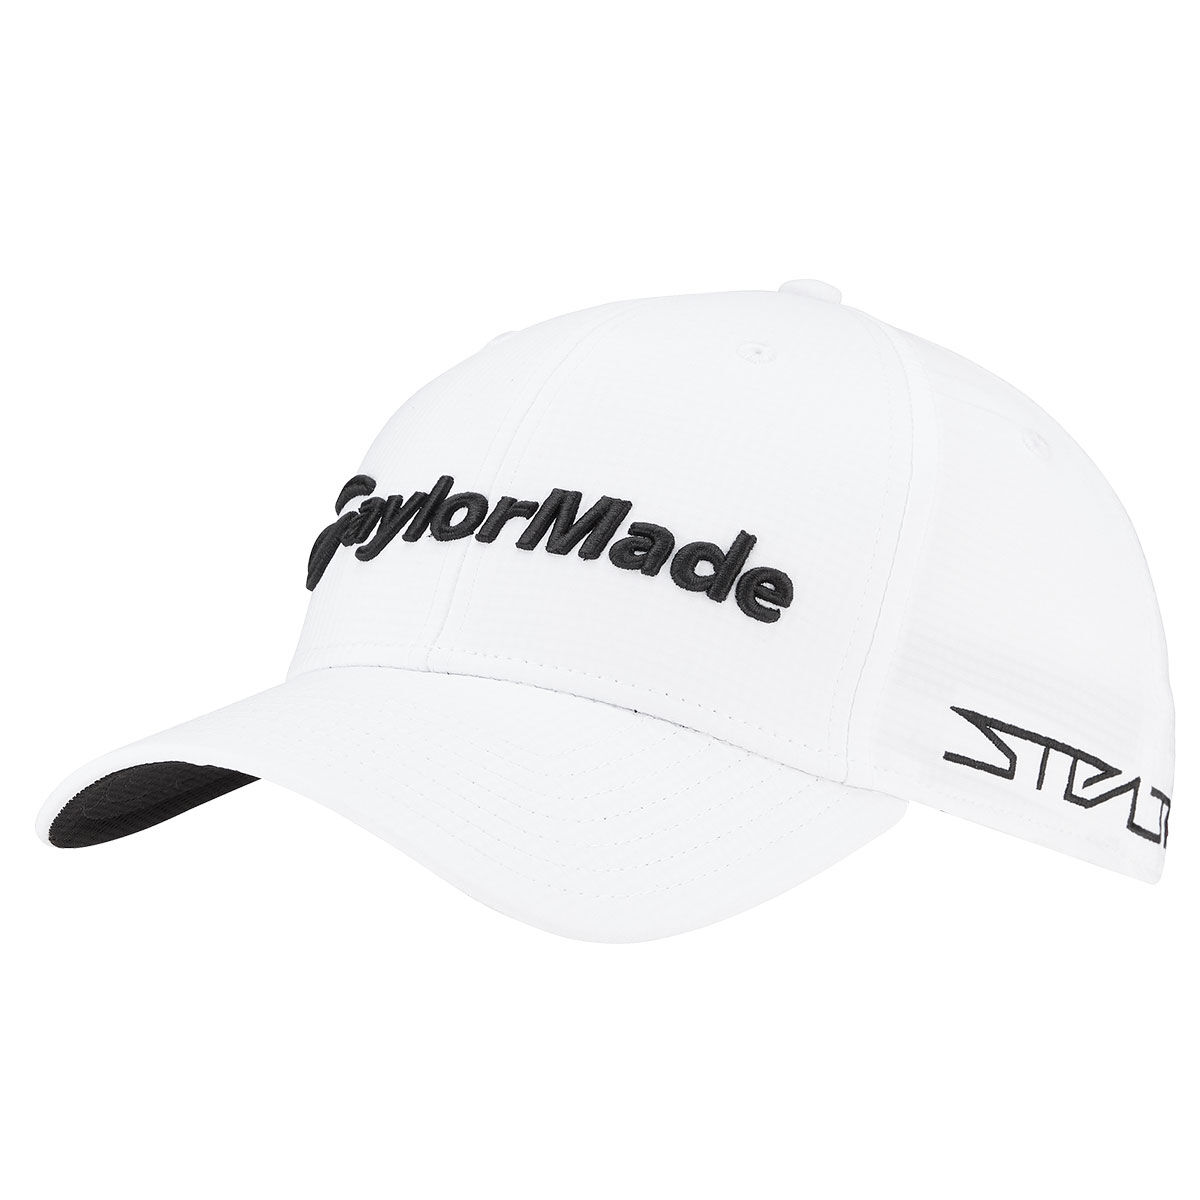 TaylorMade Golf Cap, Men's White and Black Comfortable Embroidered Tour Radar | American Golf, One Size von TaylorMade